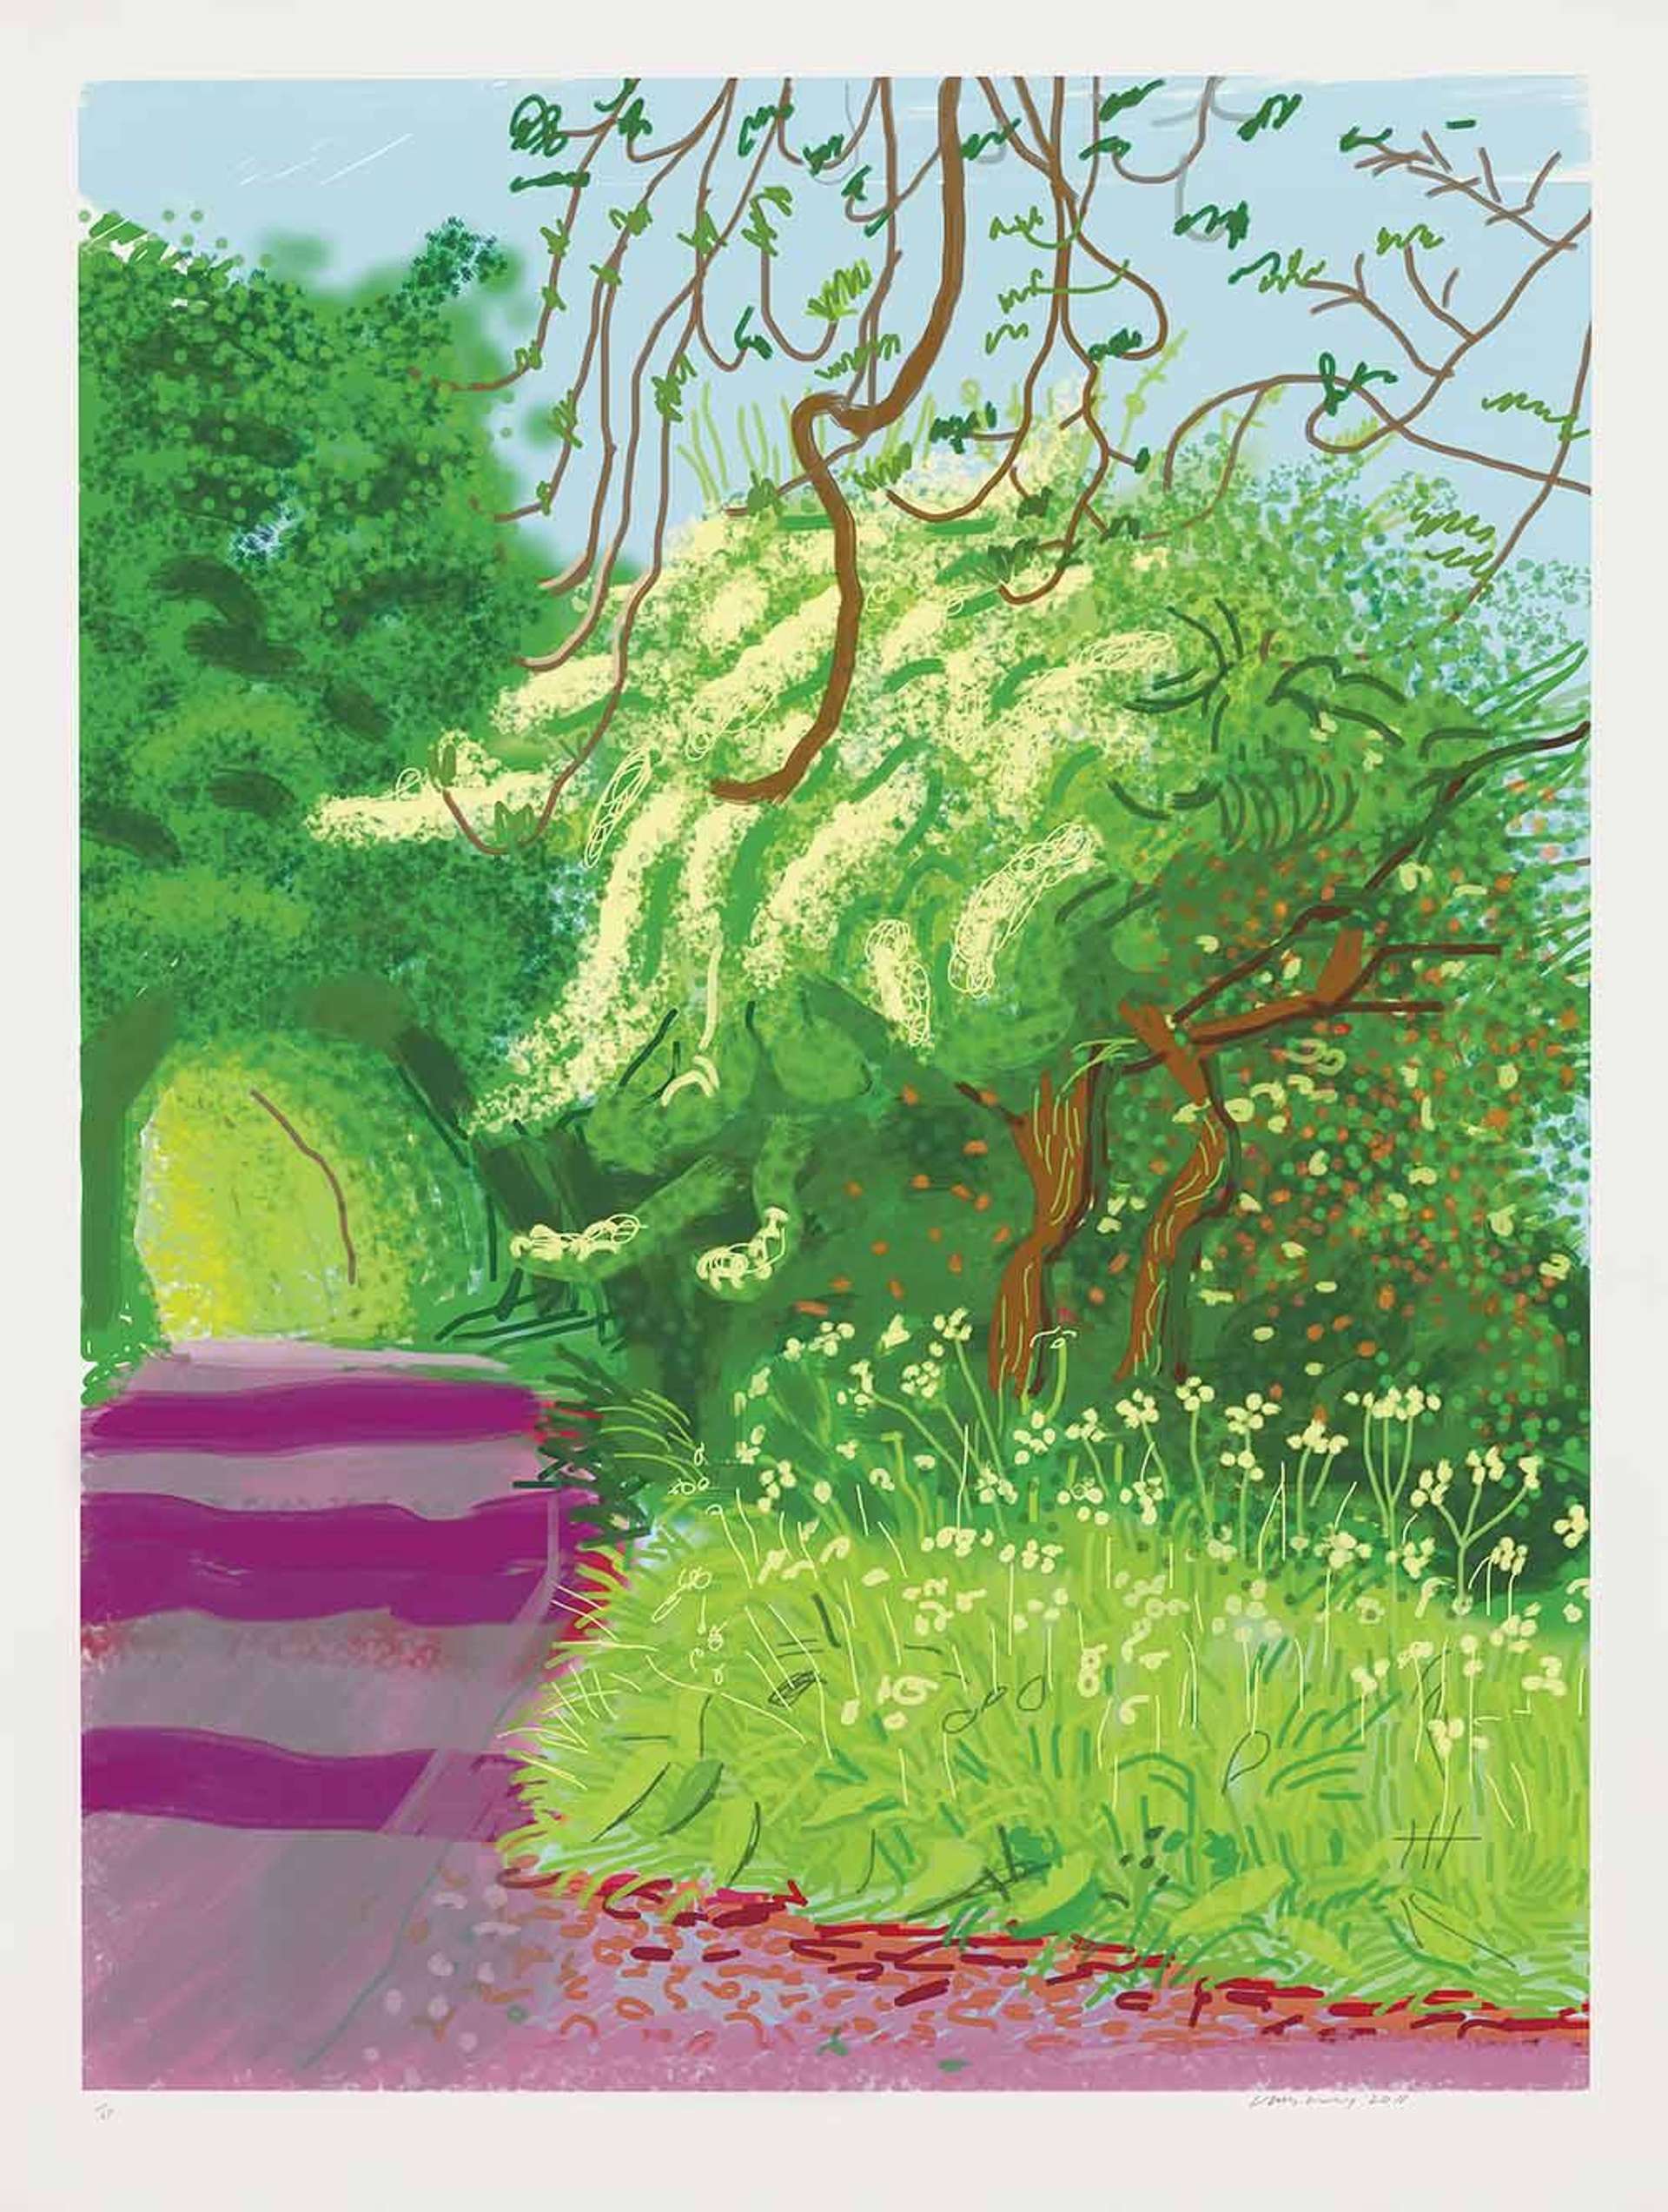 The Arrival Of Spring In Woldgate East Yorkshire 14th May 2011 - Signed Print by David Hockney 2011 - MyArtBroker